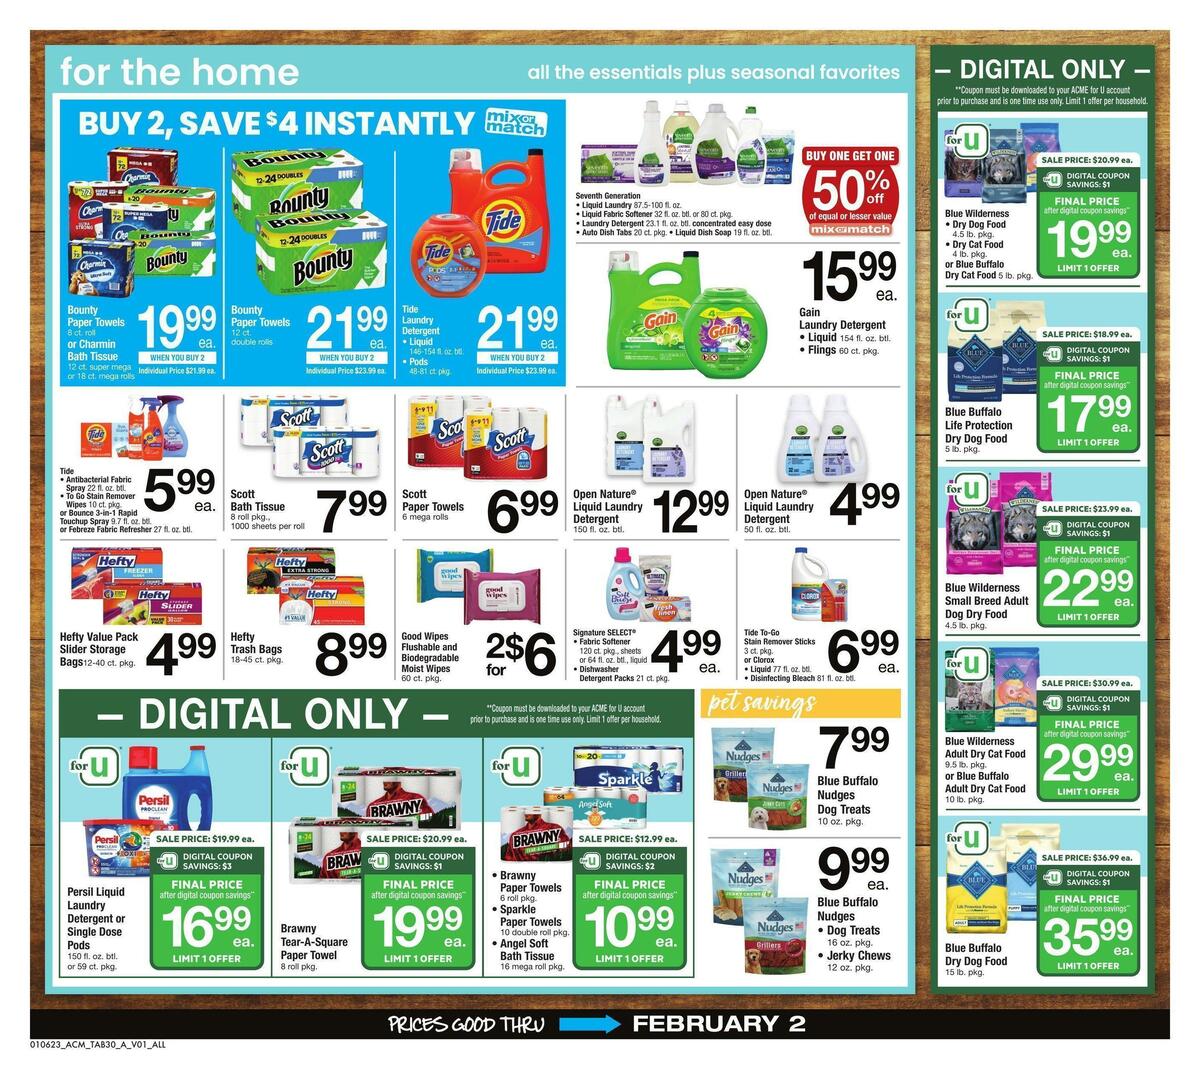 ACME Markets Weekly Ad from January 6